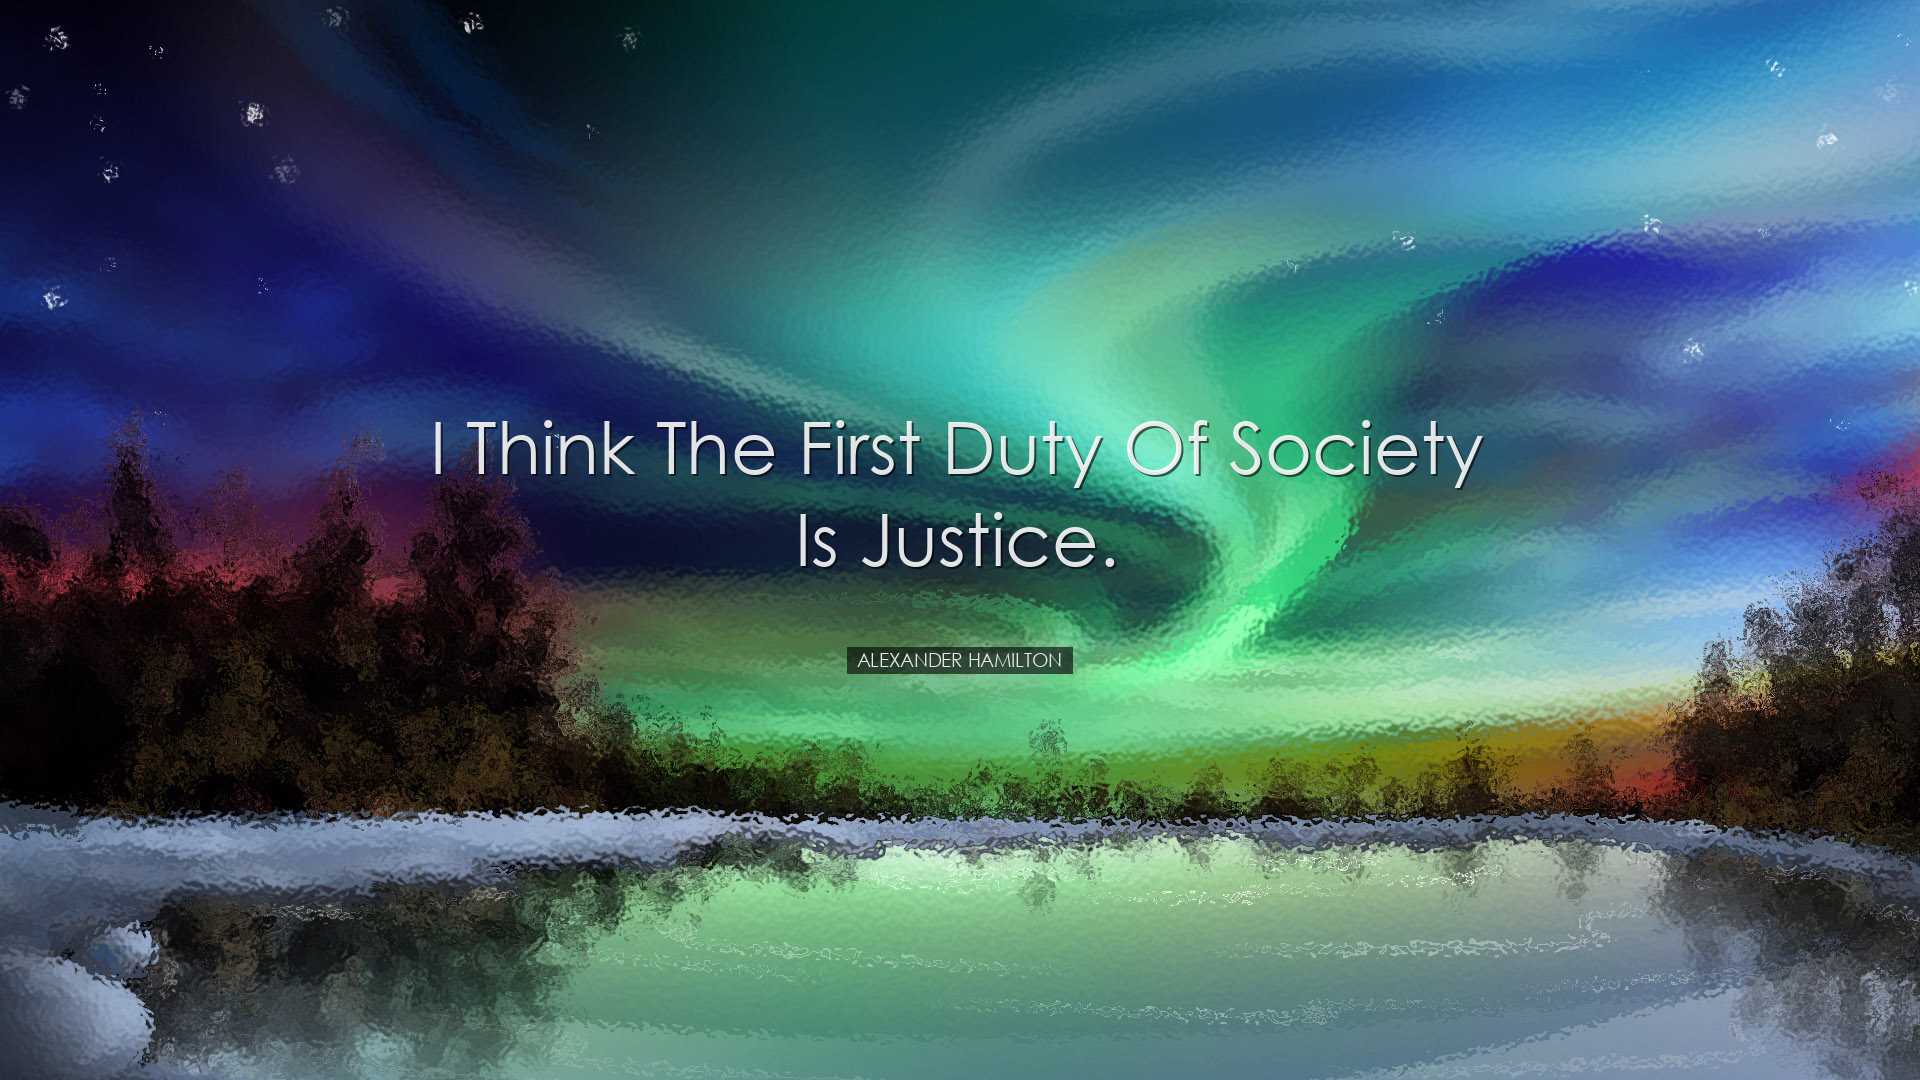 I think the first duty of society is justice. - Alexander Hamilton